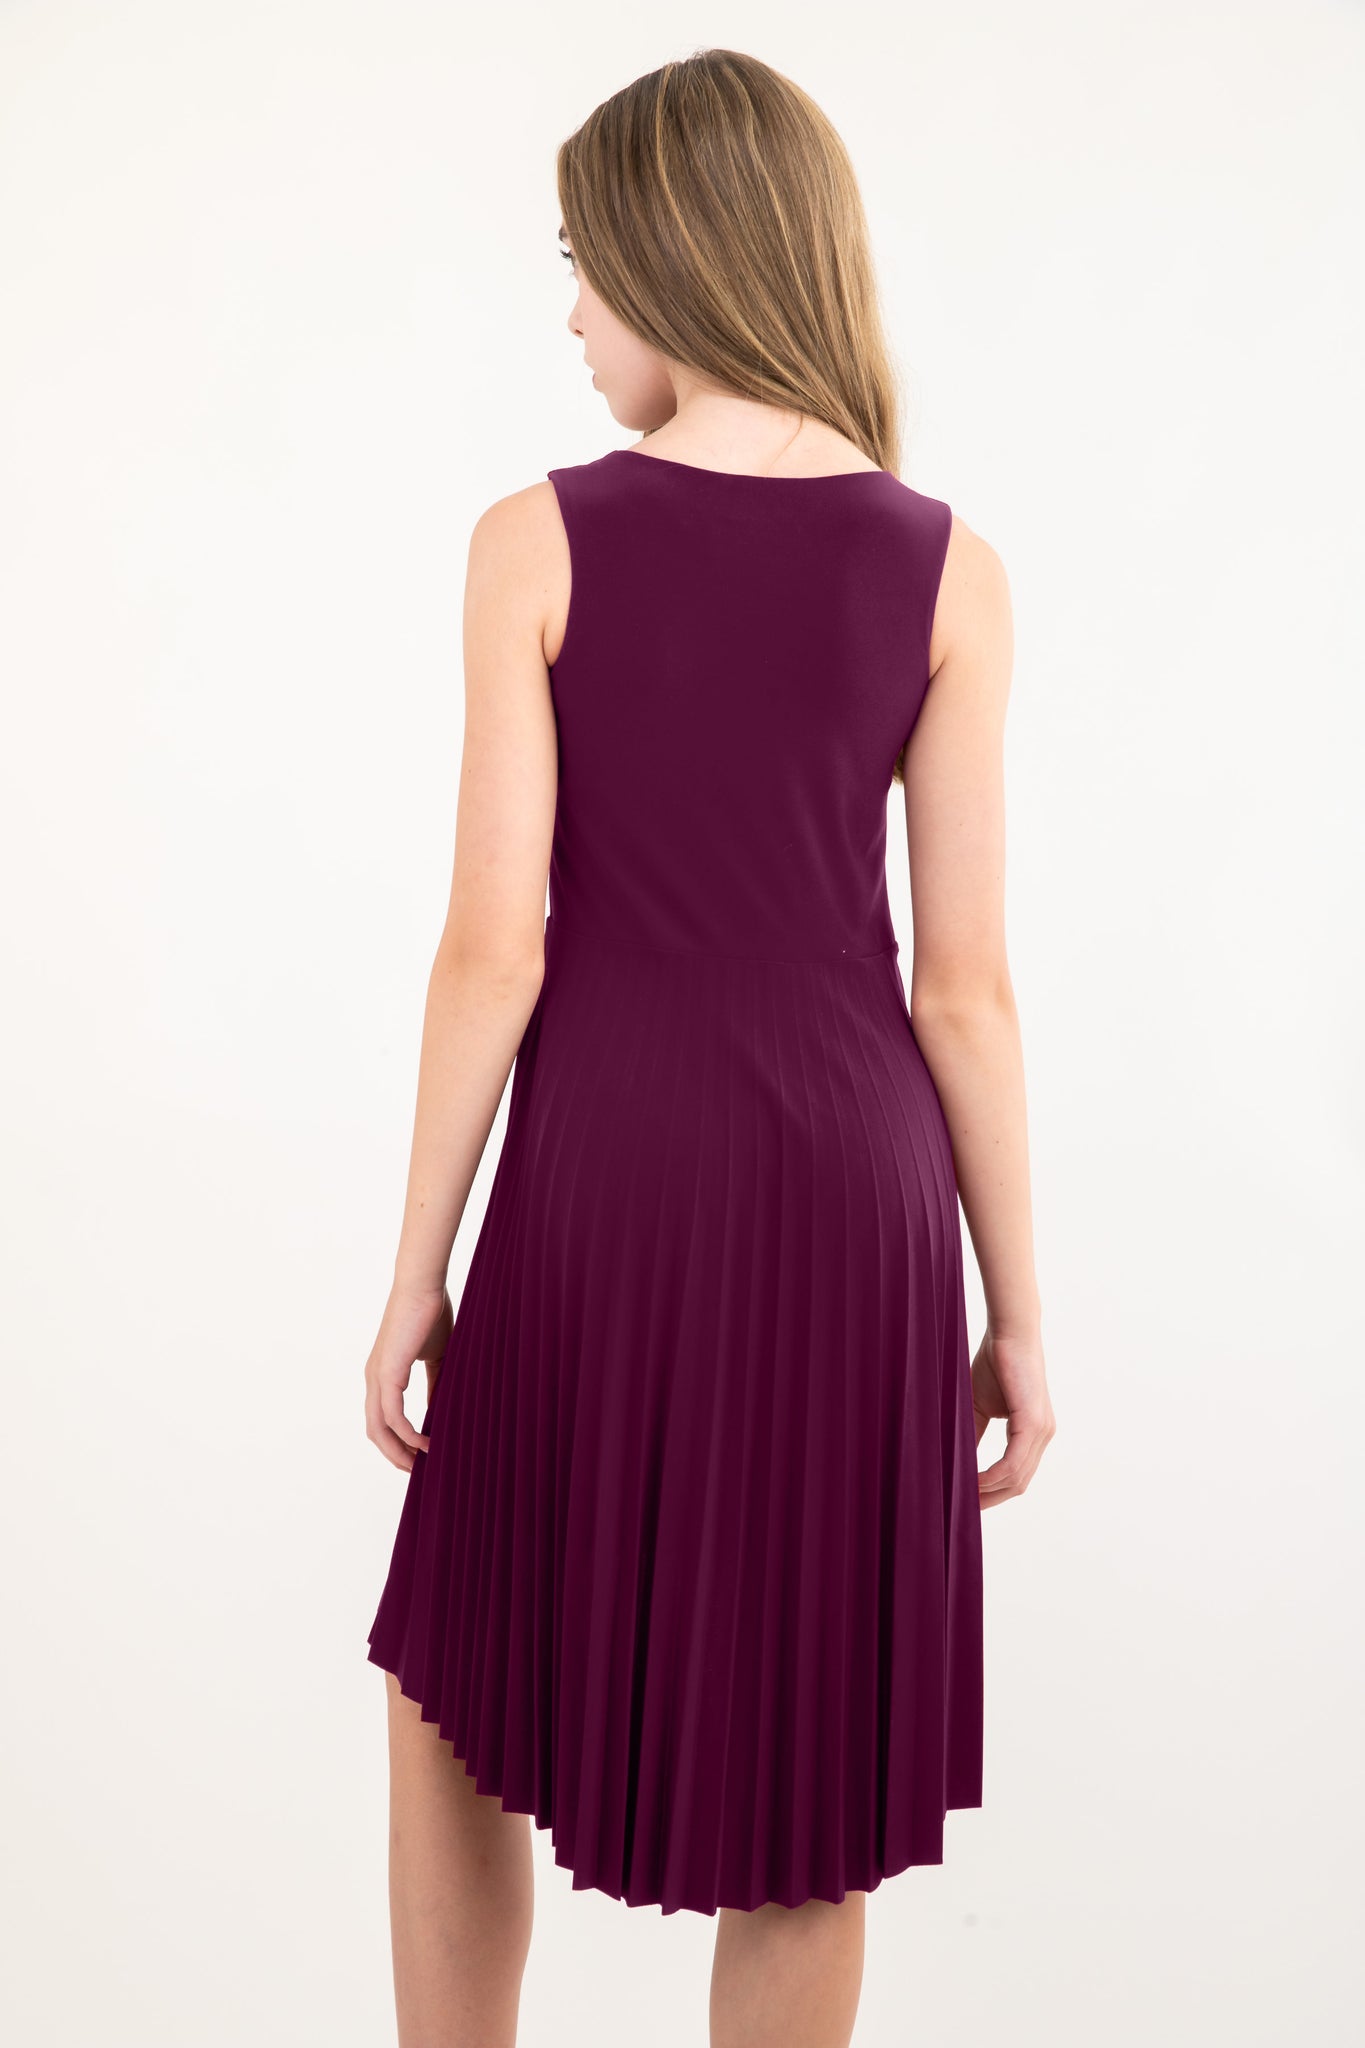 Blonde girl in a plum Un Deux Trois pleated high low dress with belt.